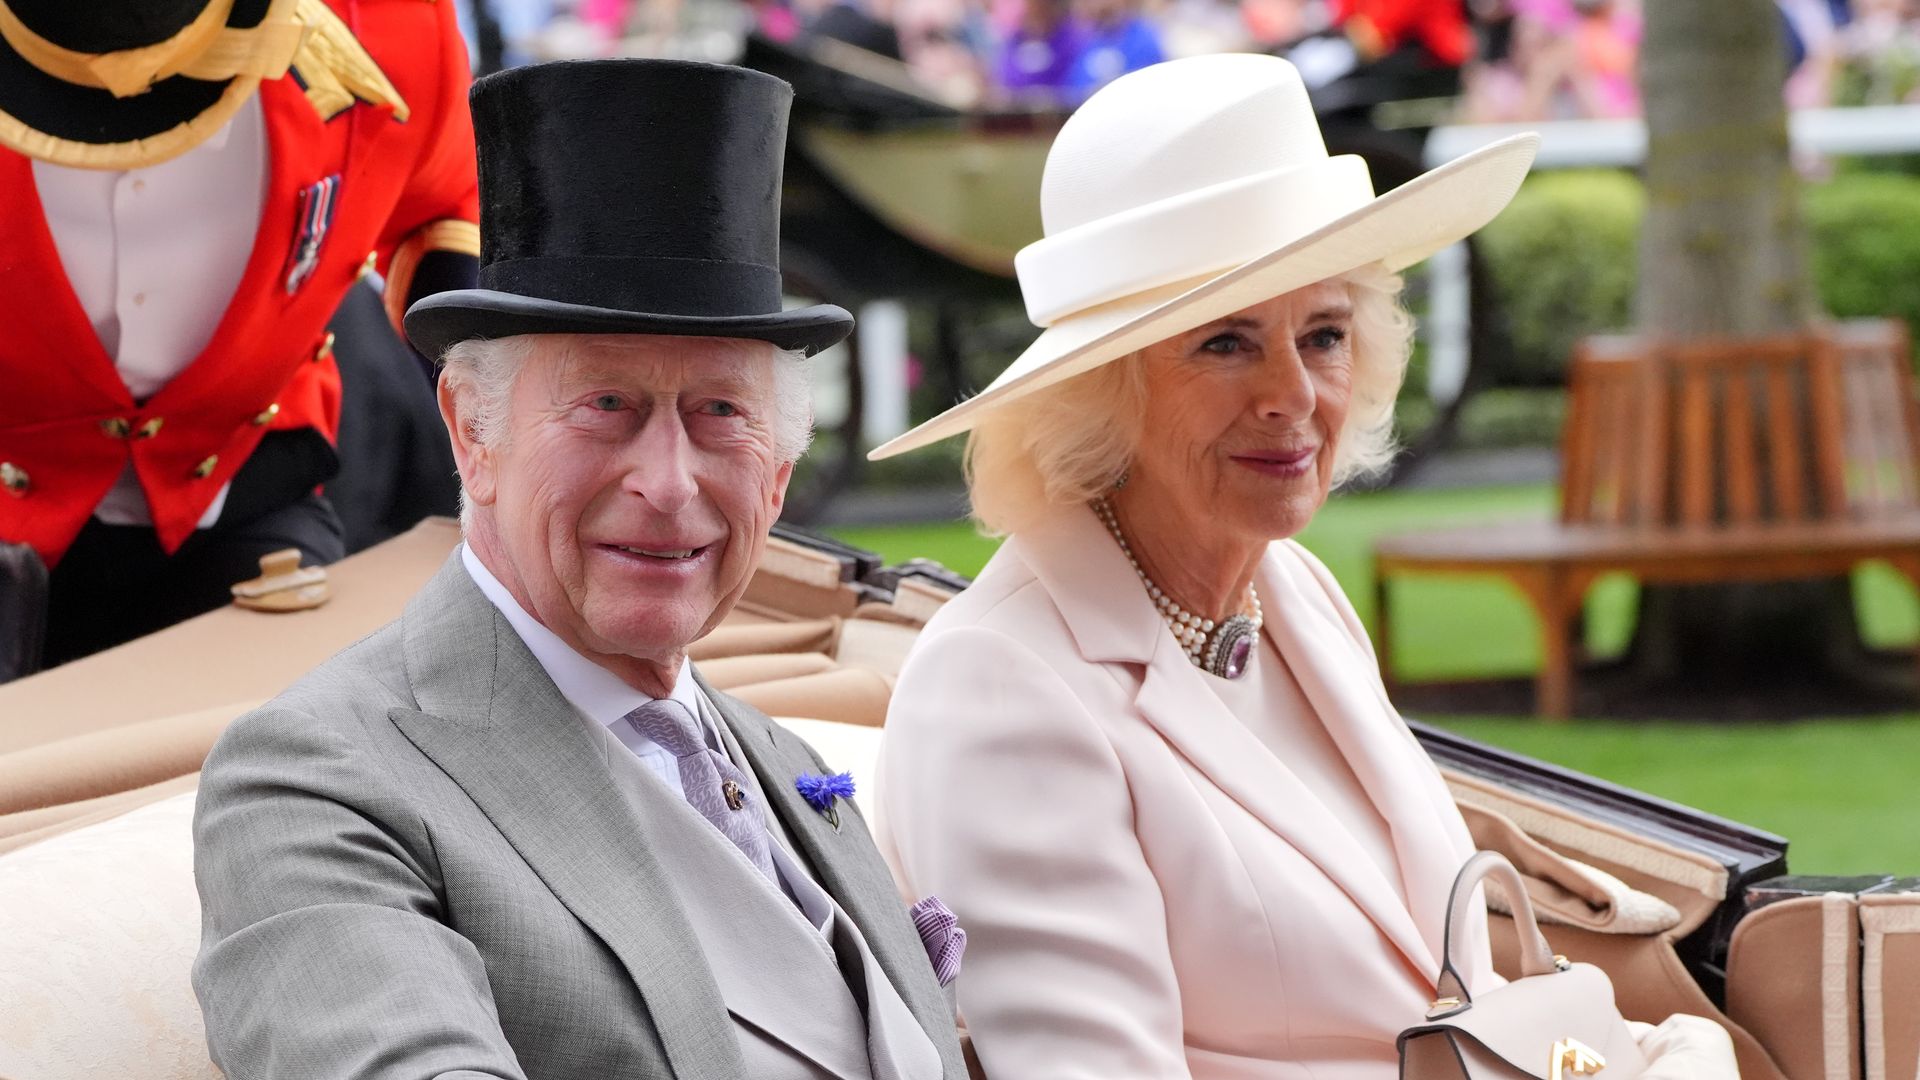 King Charles III and Queen Camilla arrives by carriage during day five of Royal Ascot at Ascot Racecourse, Berkshire